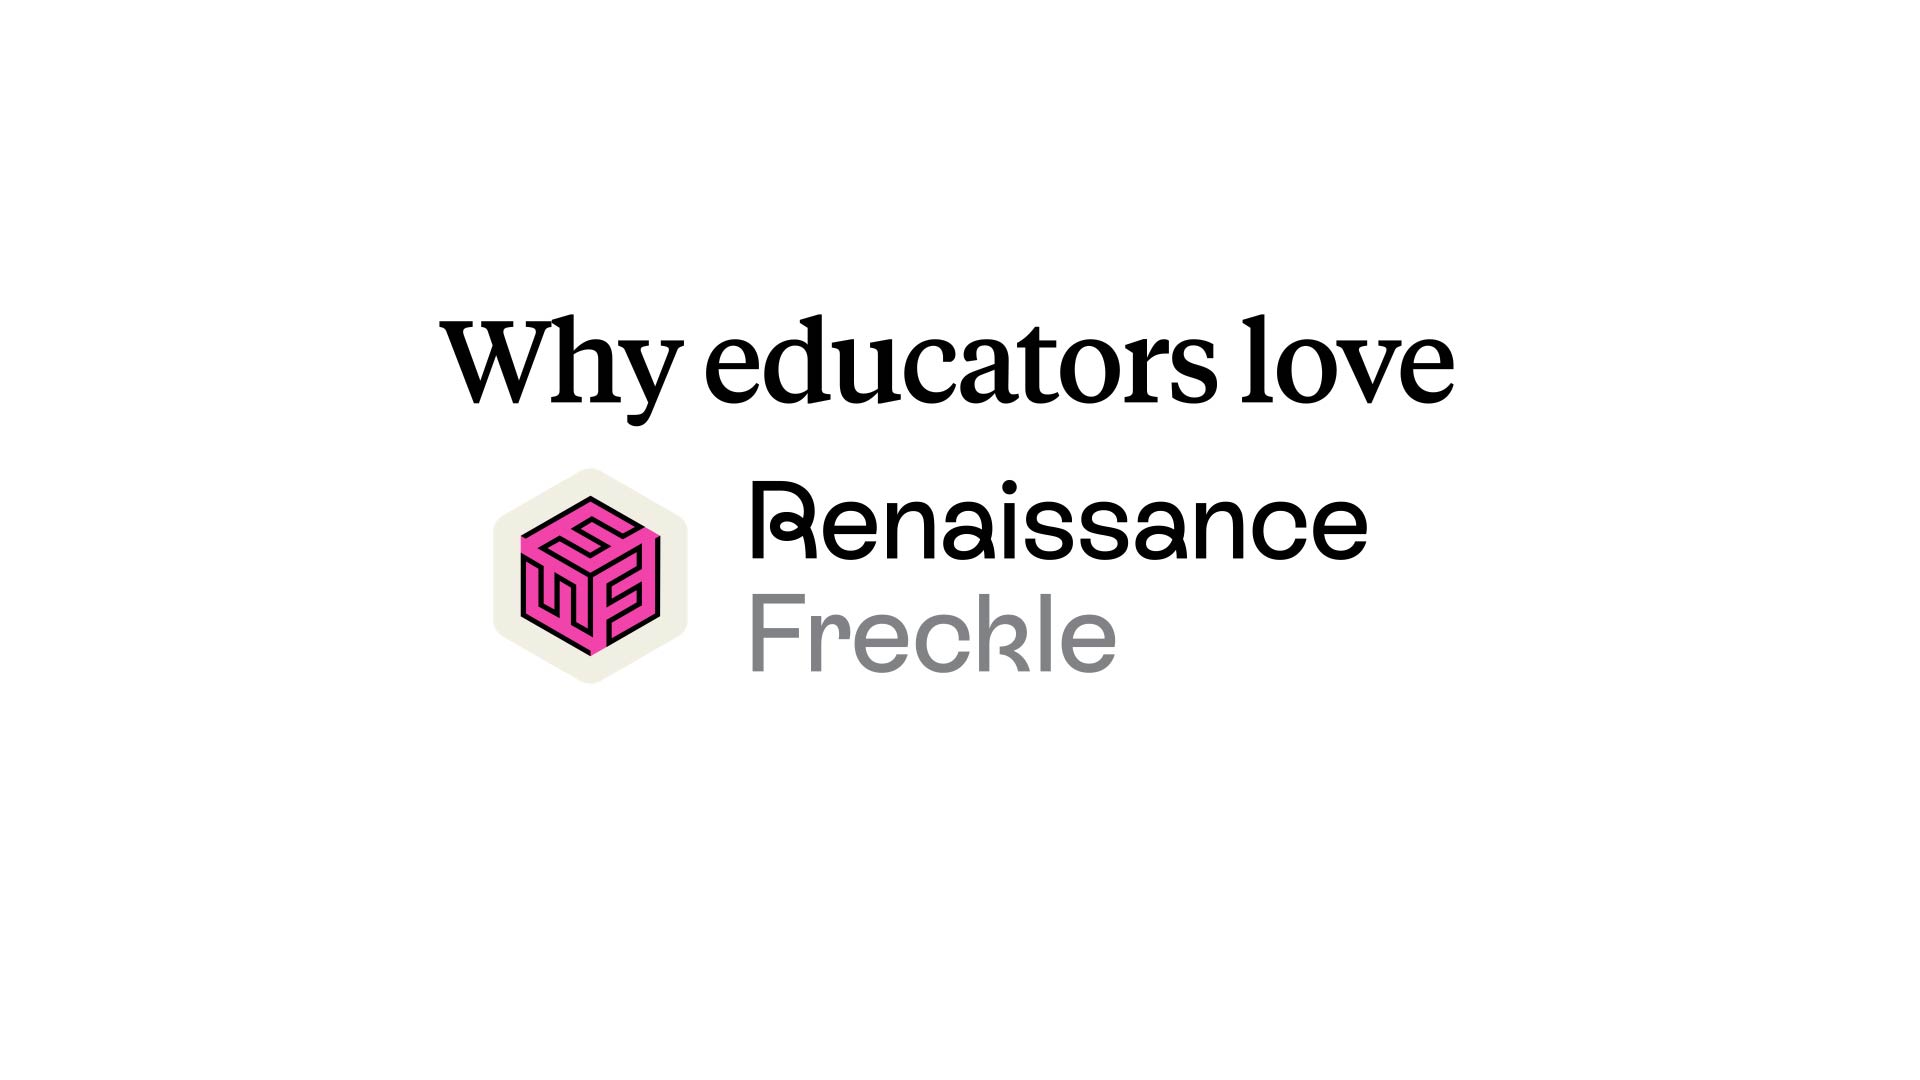 Why do educators love Freckle?